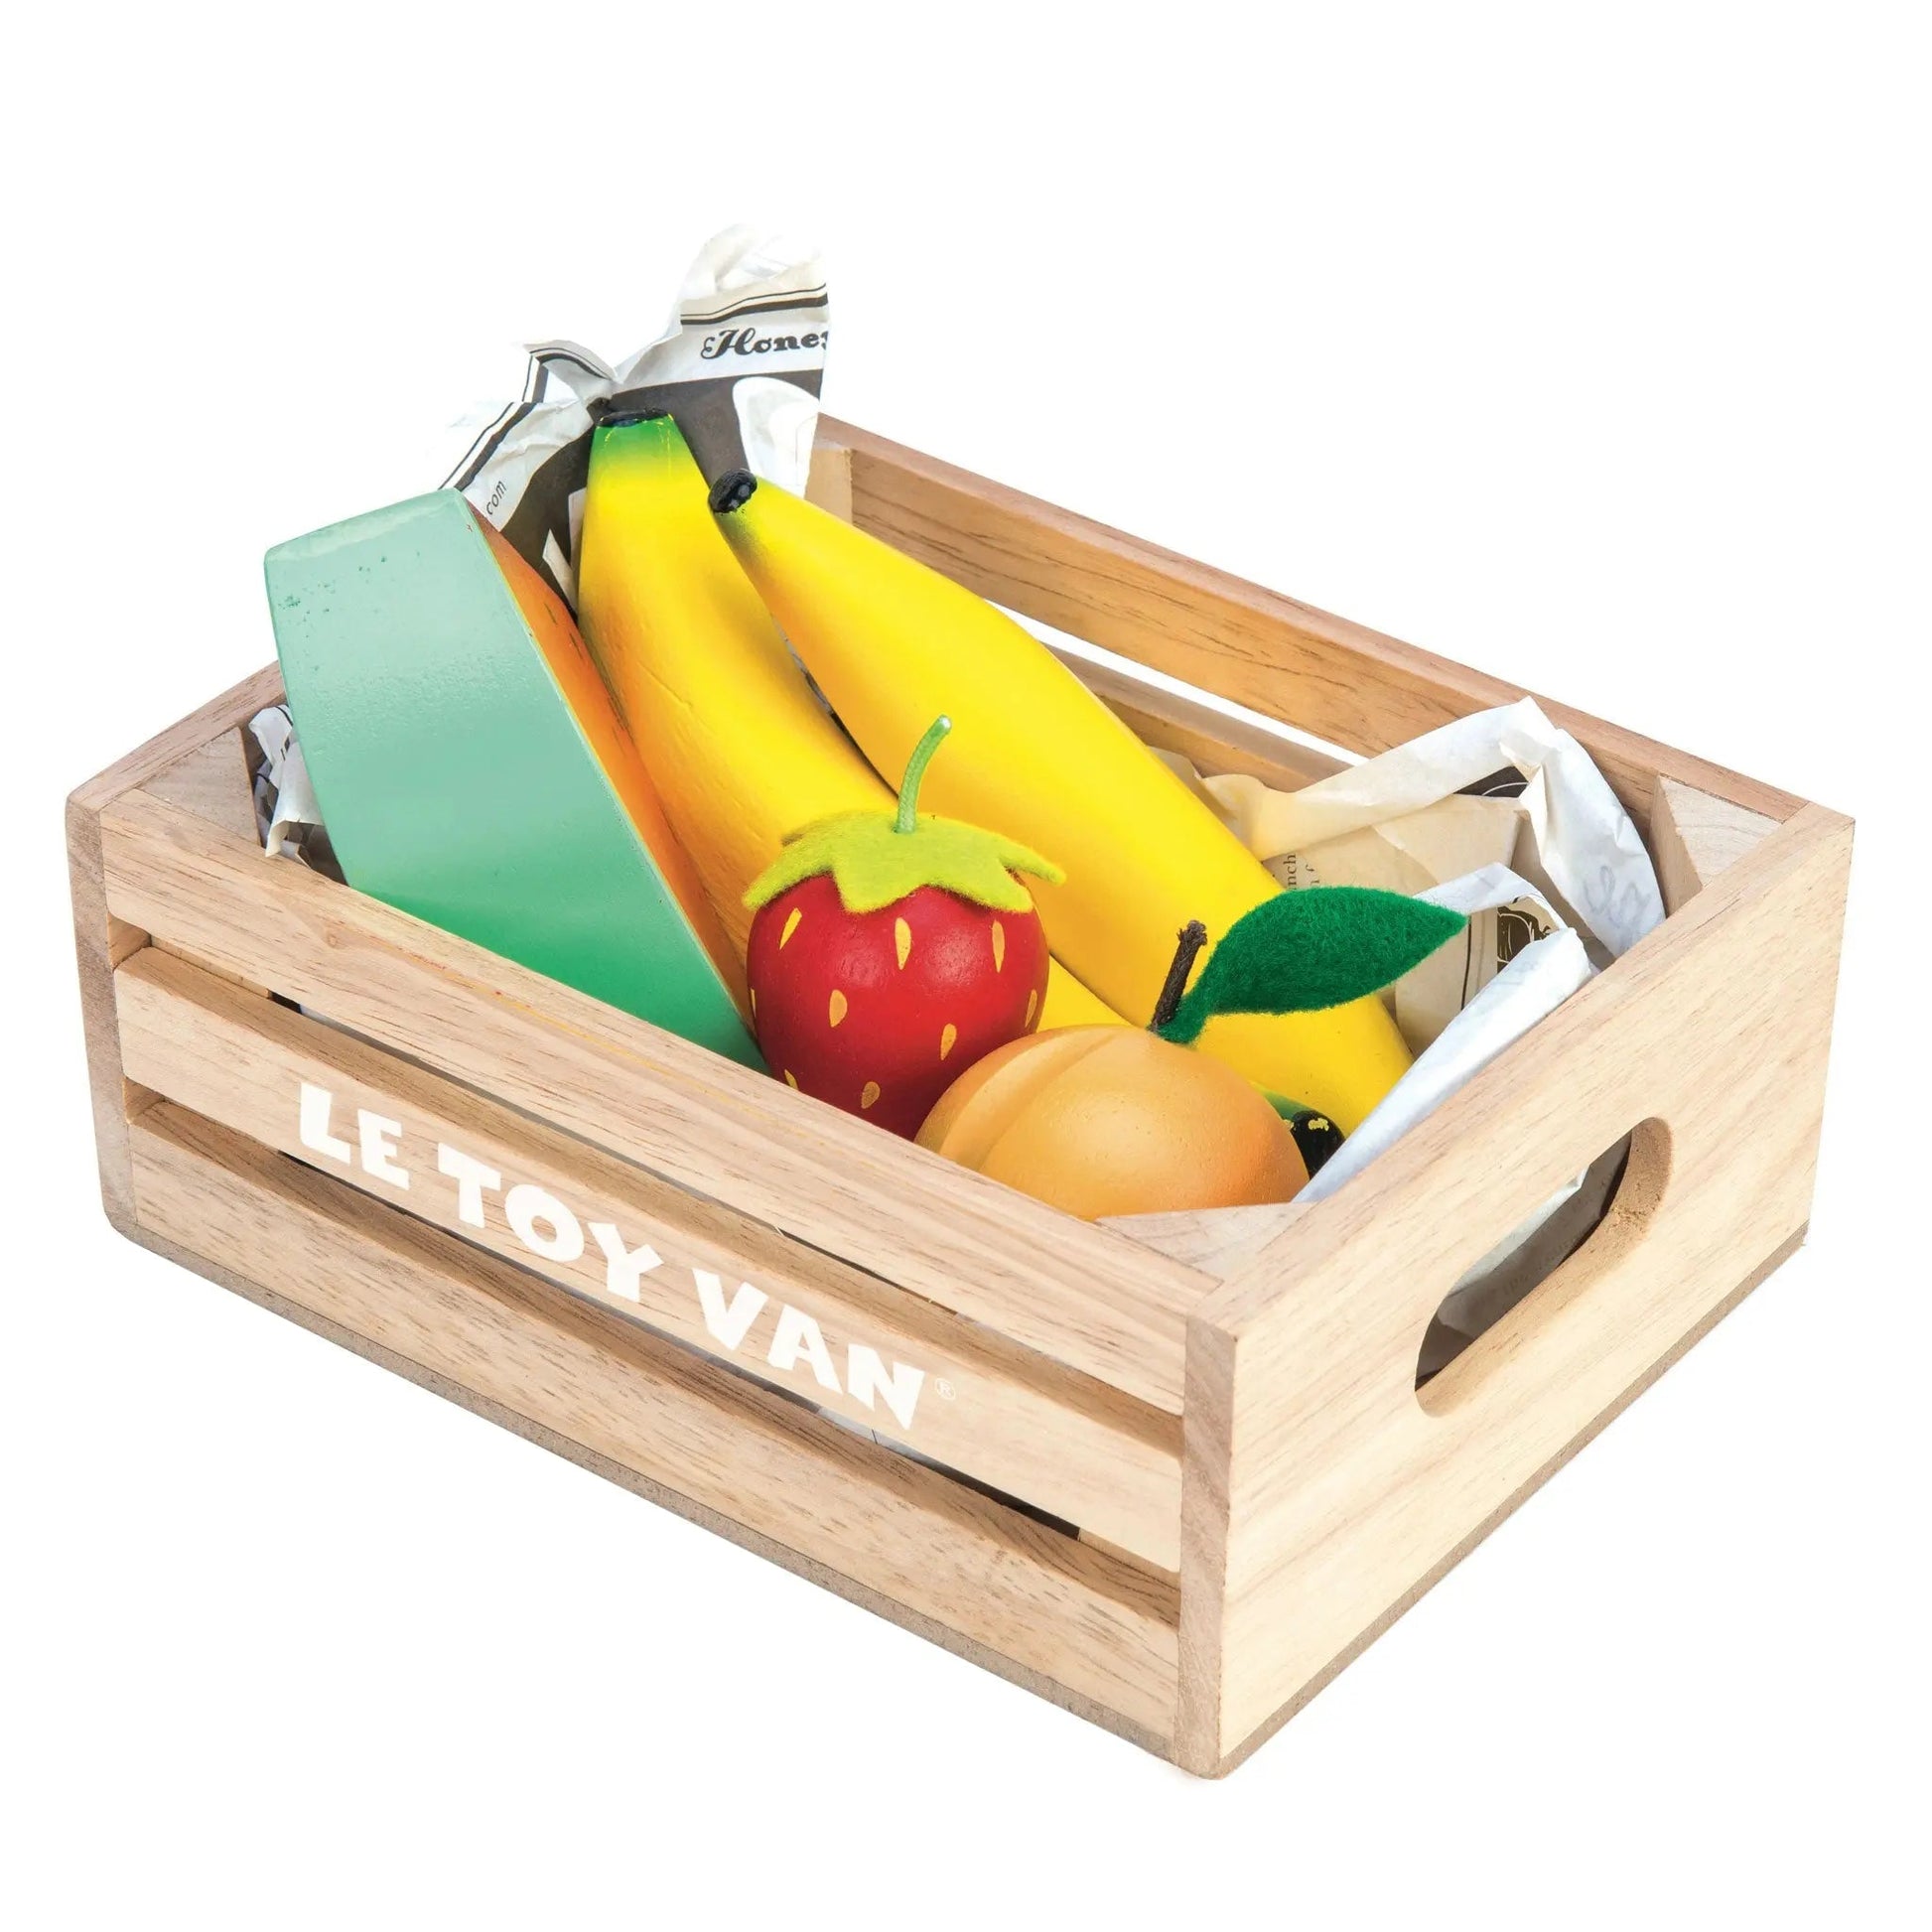 Fruits '5 a Day' Crate - Le Toy Van - The Forgotten Toy Shop